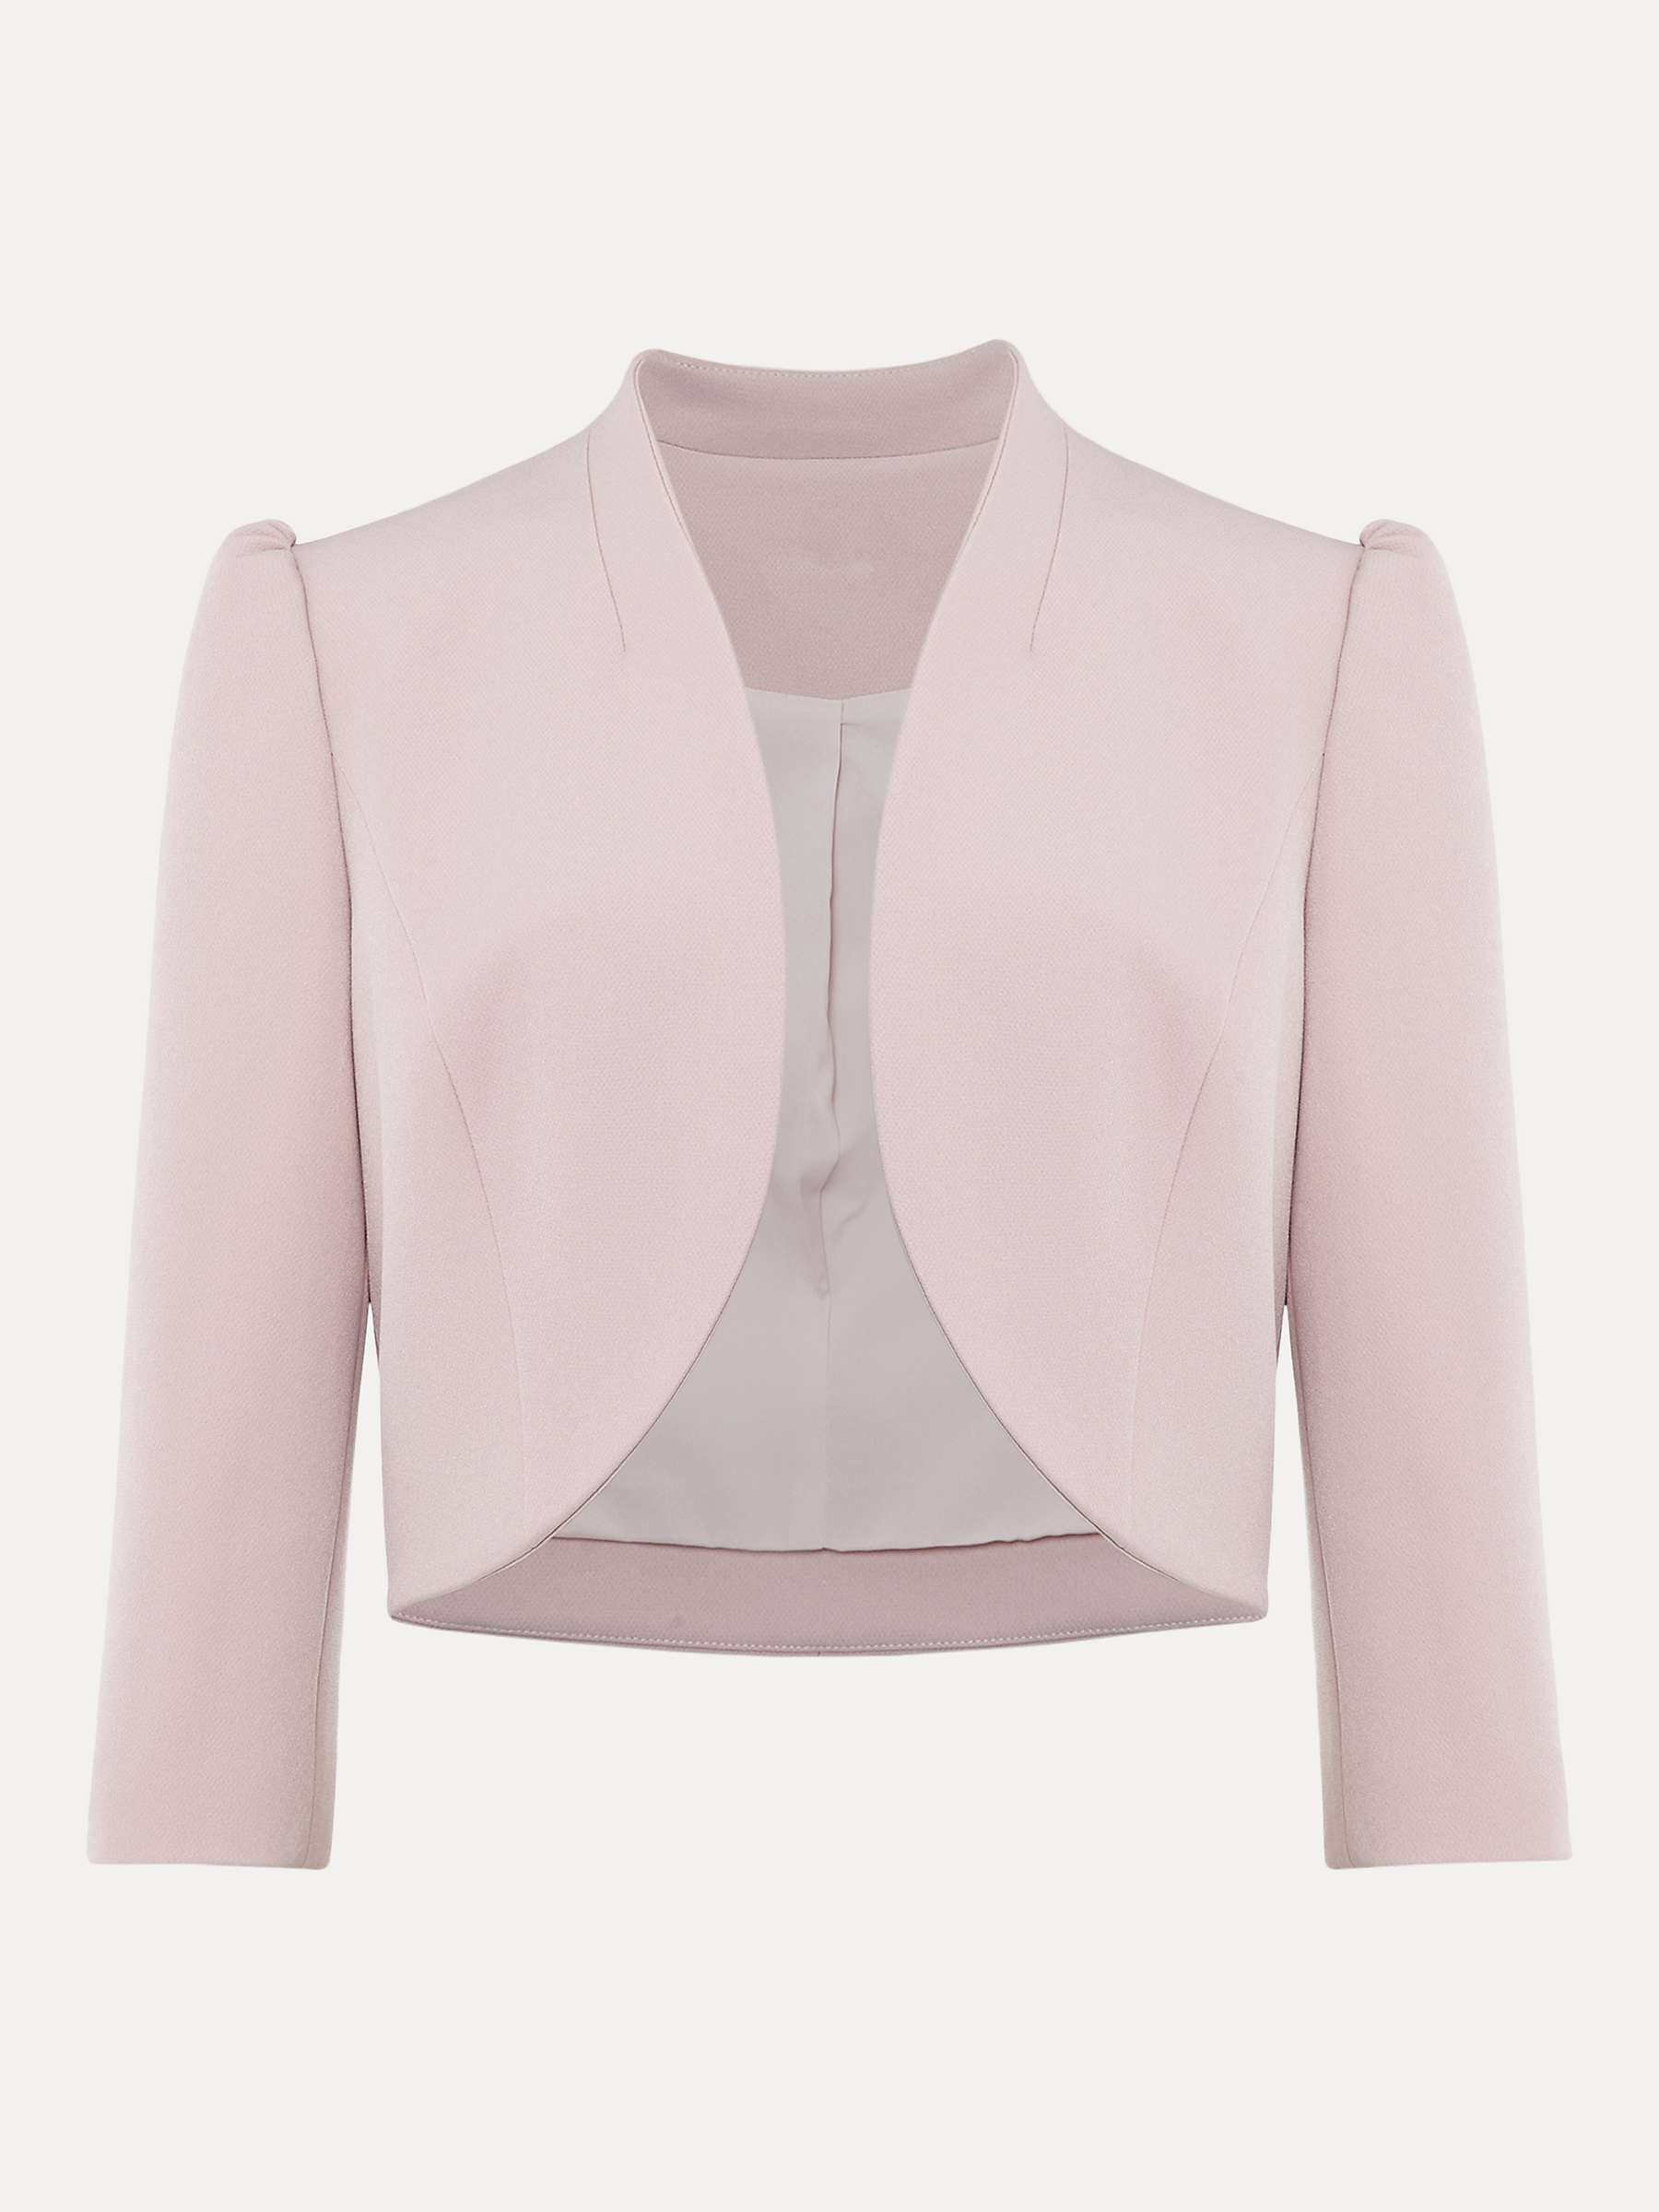 Buy Phase Eight Leanna Cropped Jacket Online at johnlewis.com